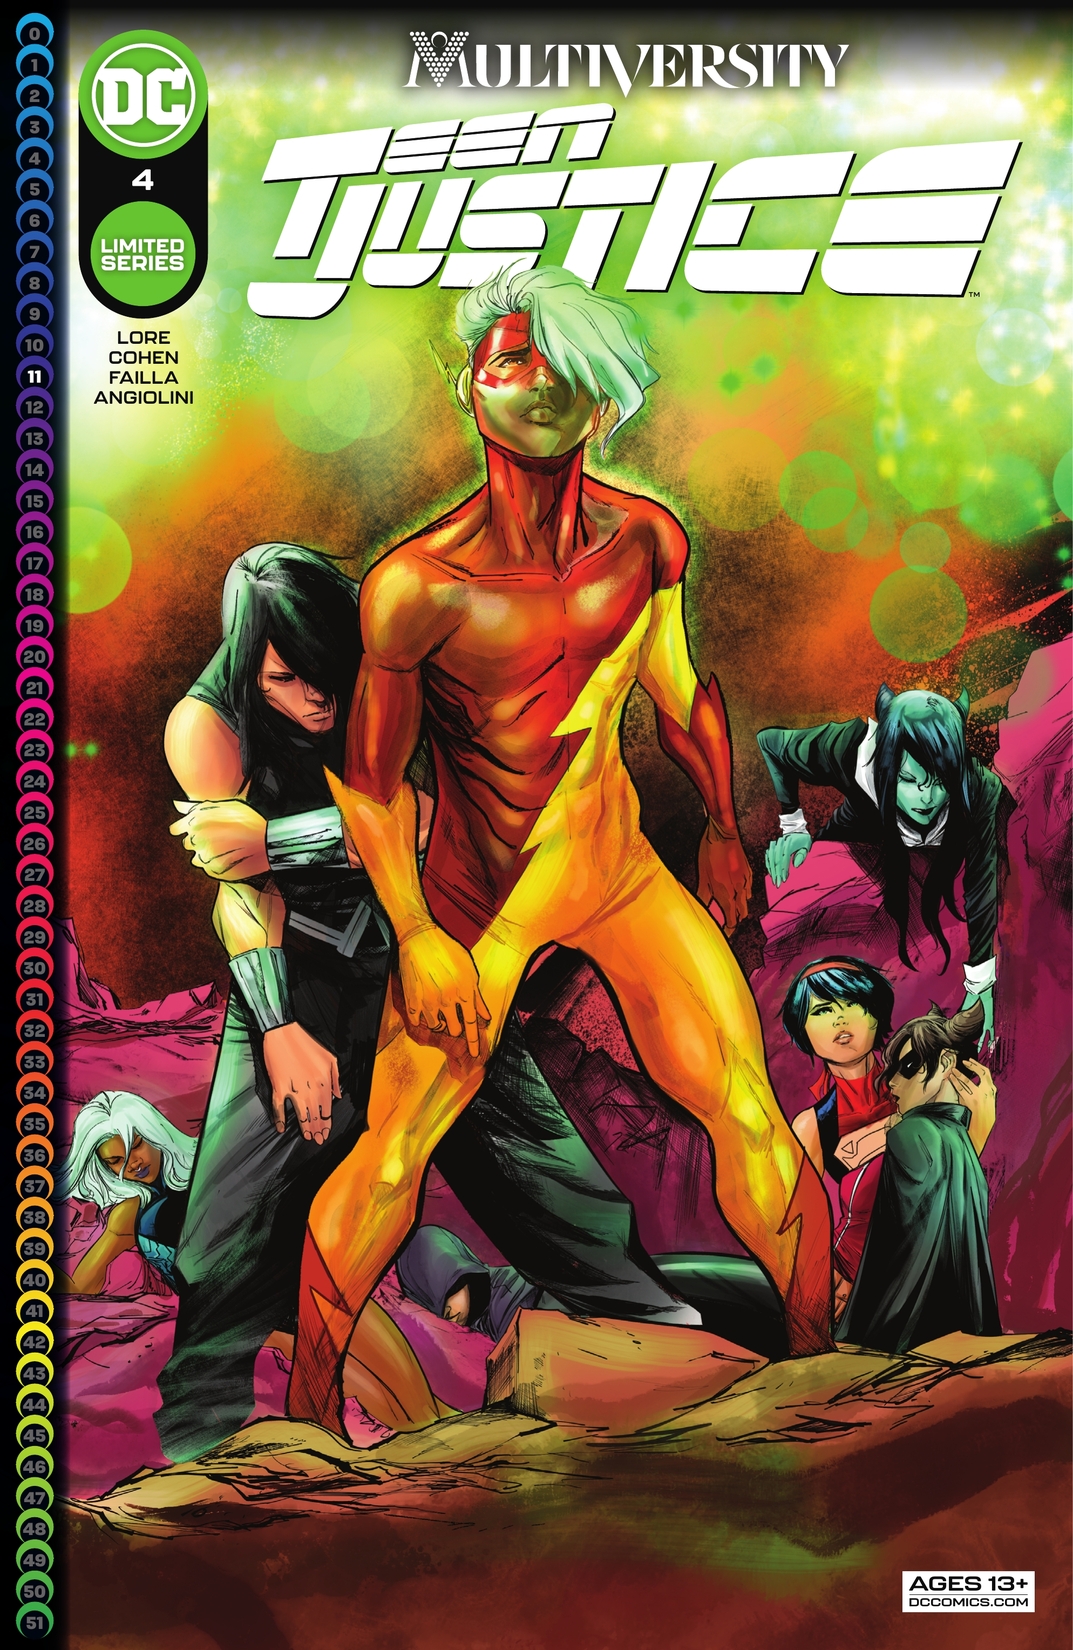 Multiversity: Teen Justice #4 preview images